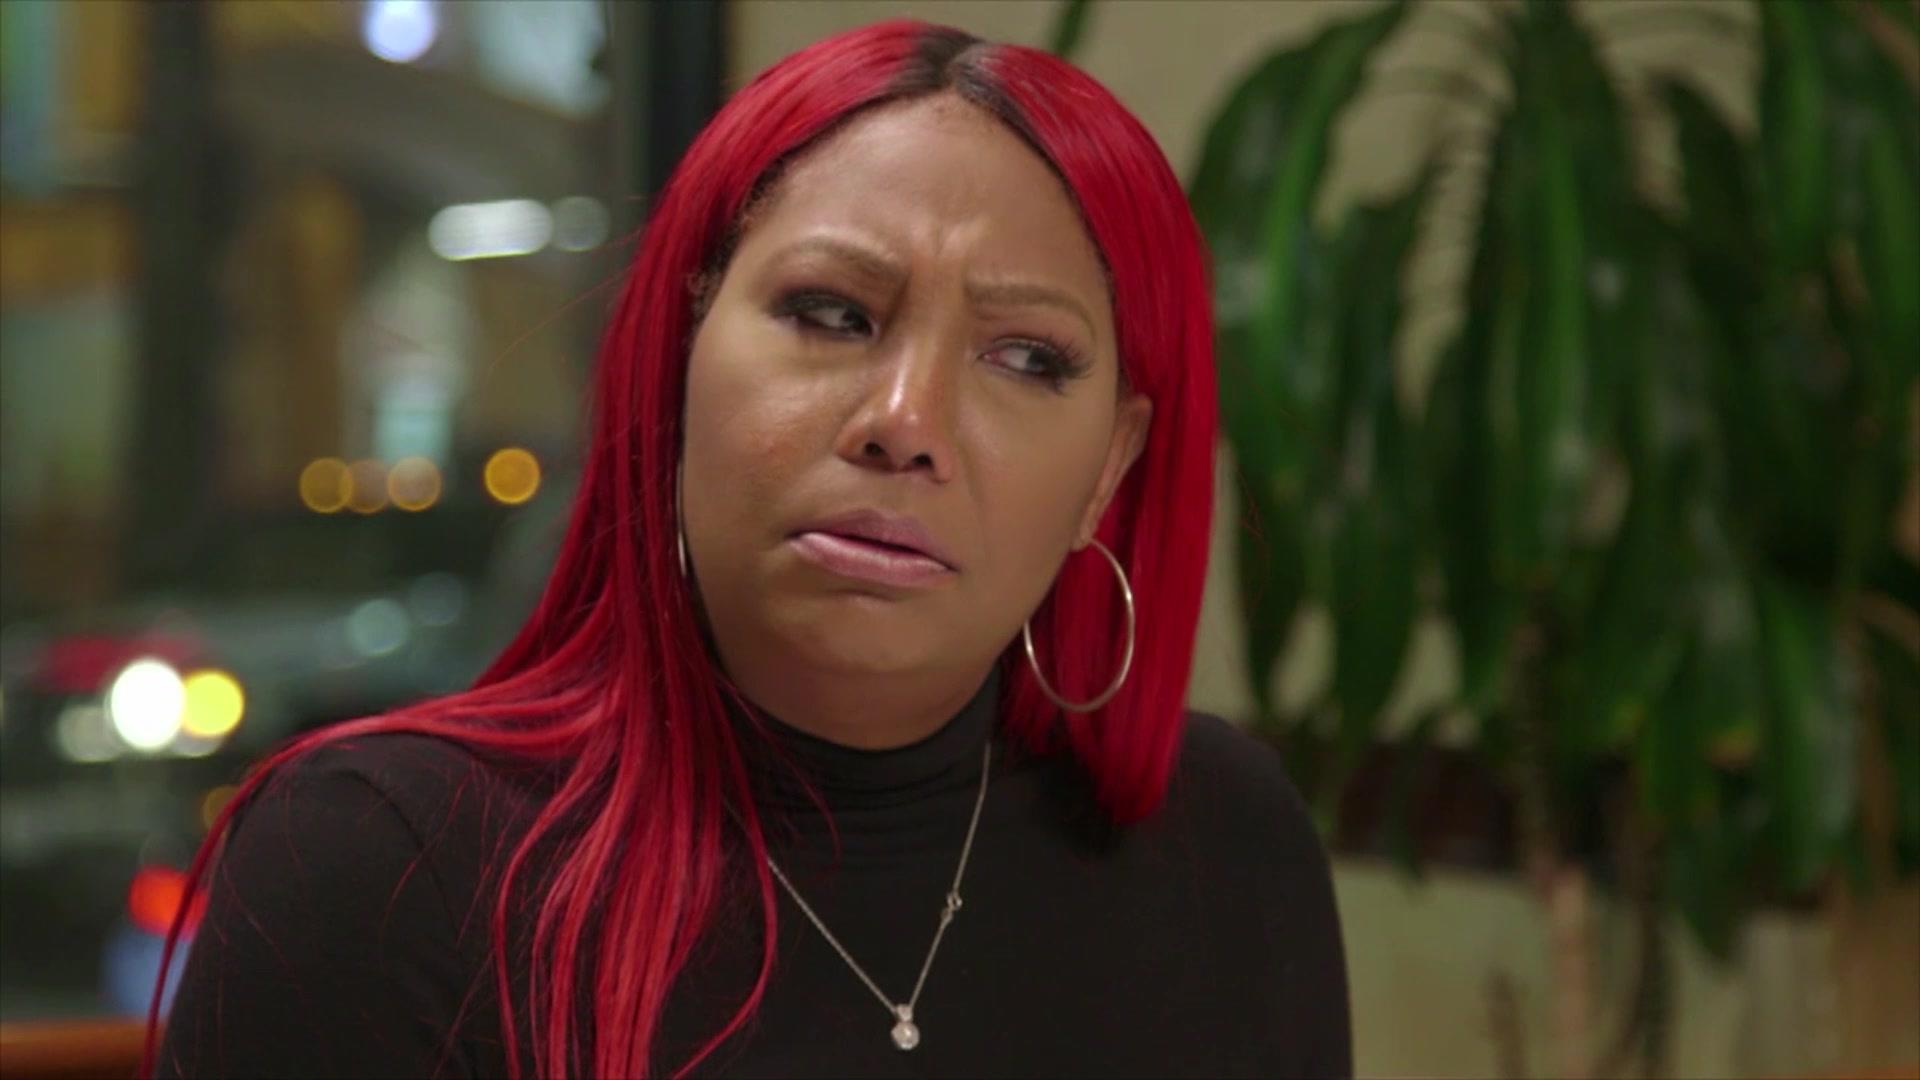 Toni Lost Her Engagement Ring?!